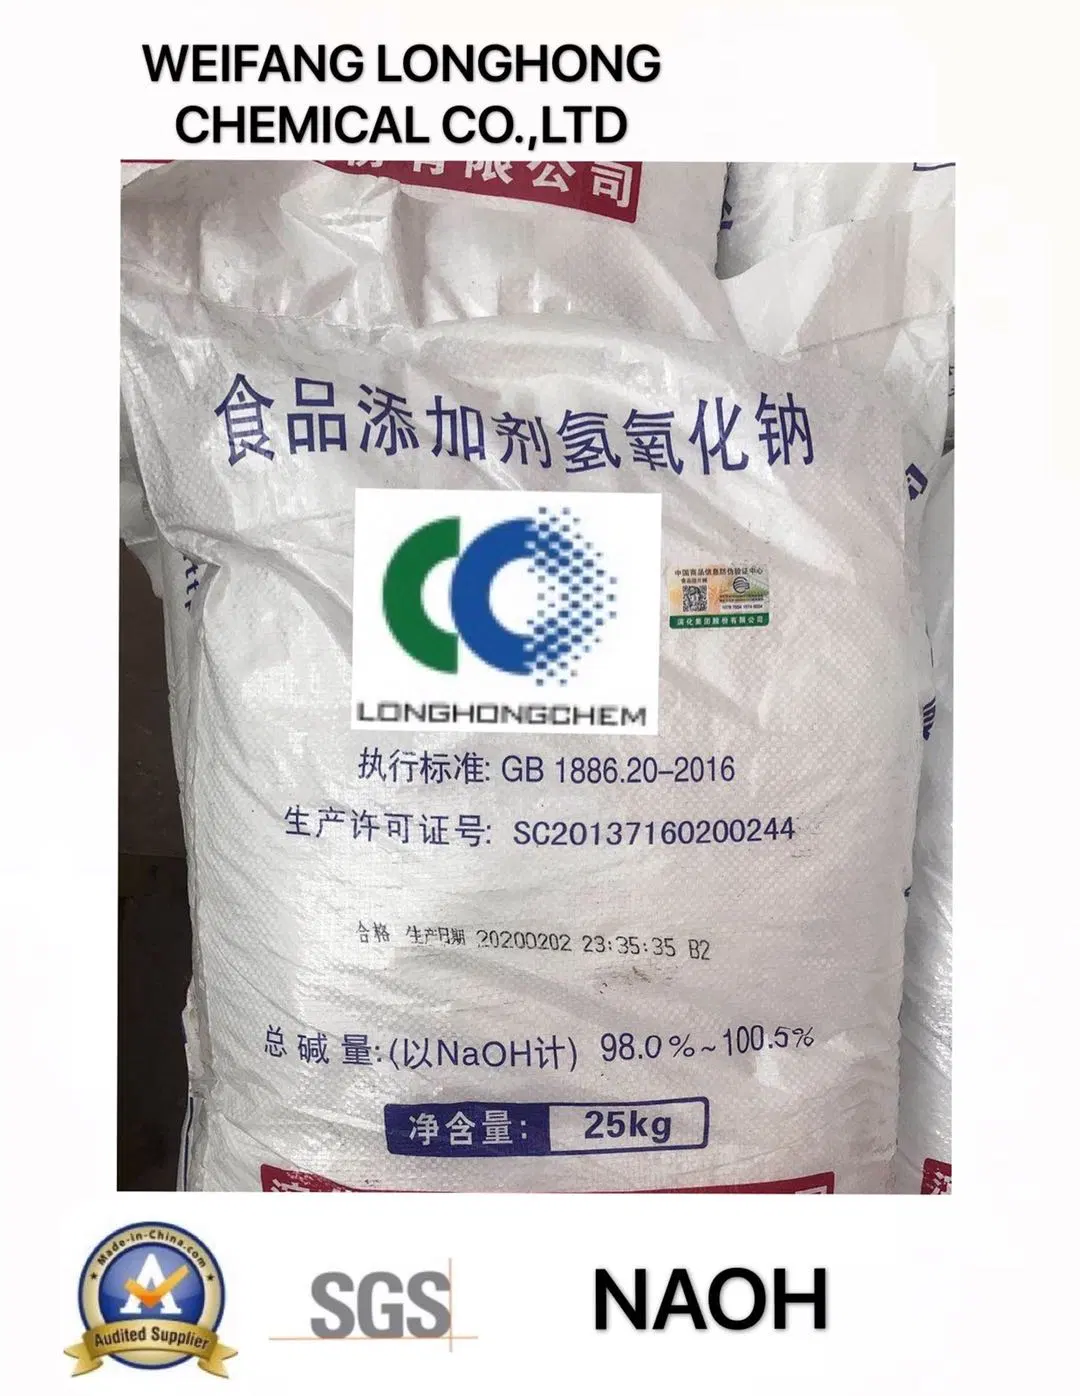 Sodium Hydroxide Is Used in Papermaking /in Line with International Standards